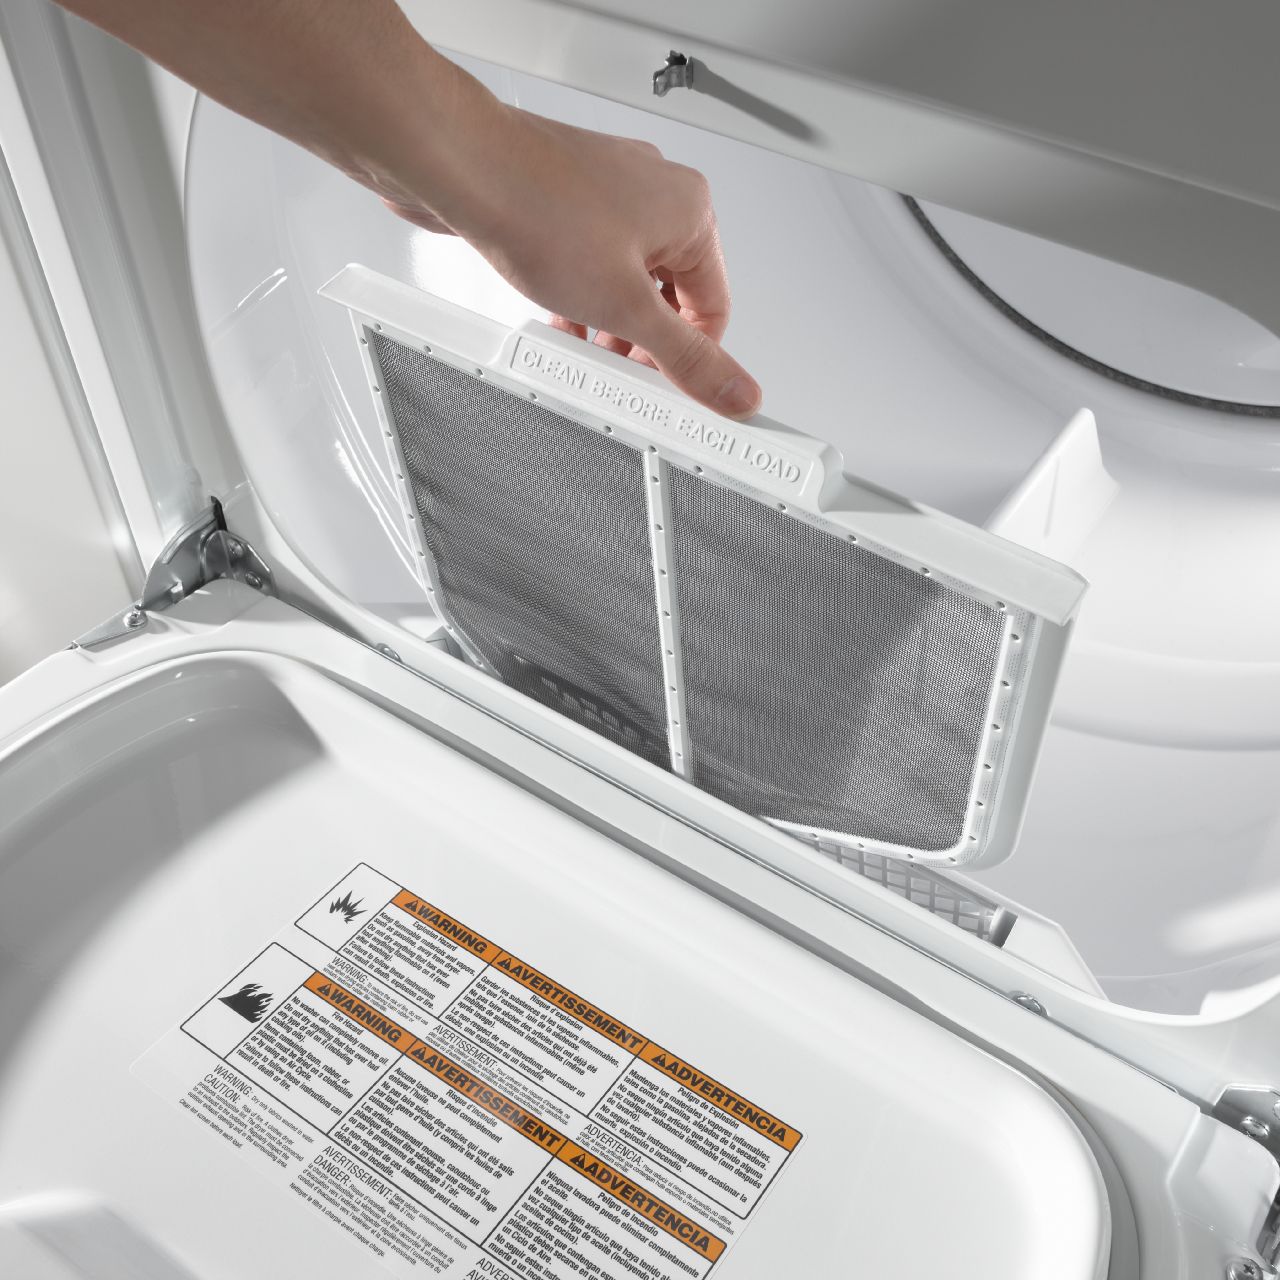 How To Clean Lint Out Of Maytag Dryer How to Find a Hidden Lint Clog in Your Dryer - Fleet Appliance